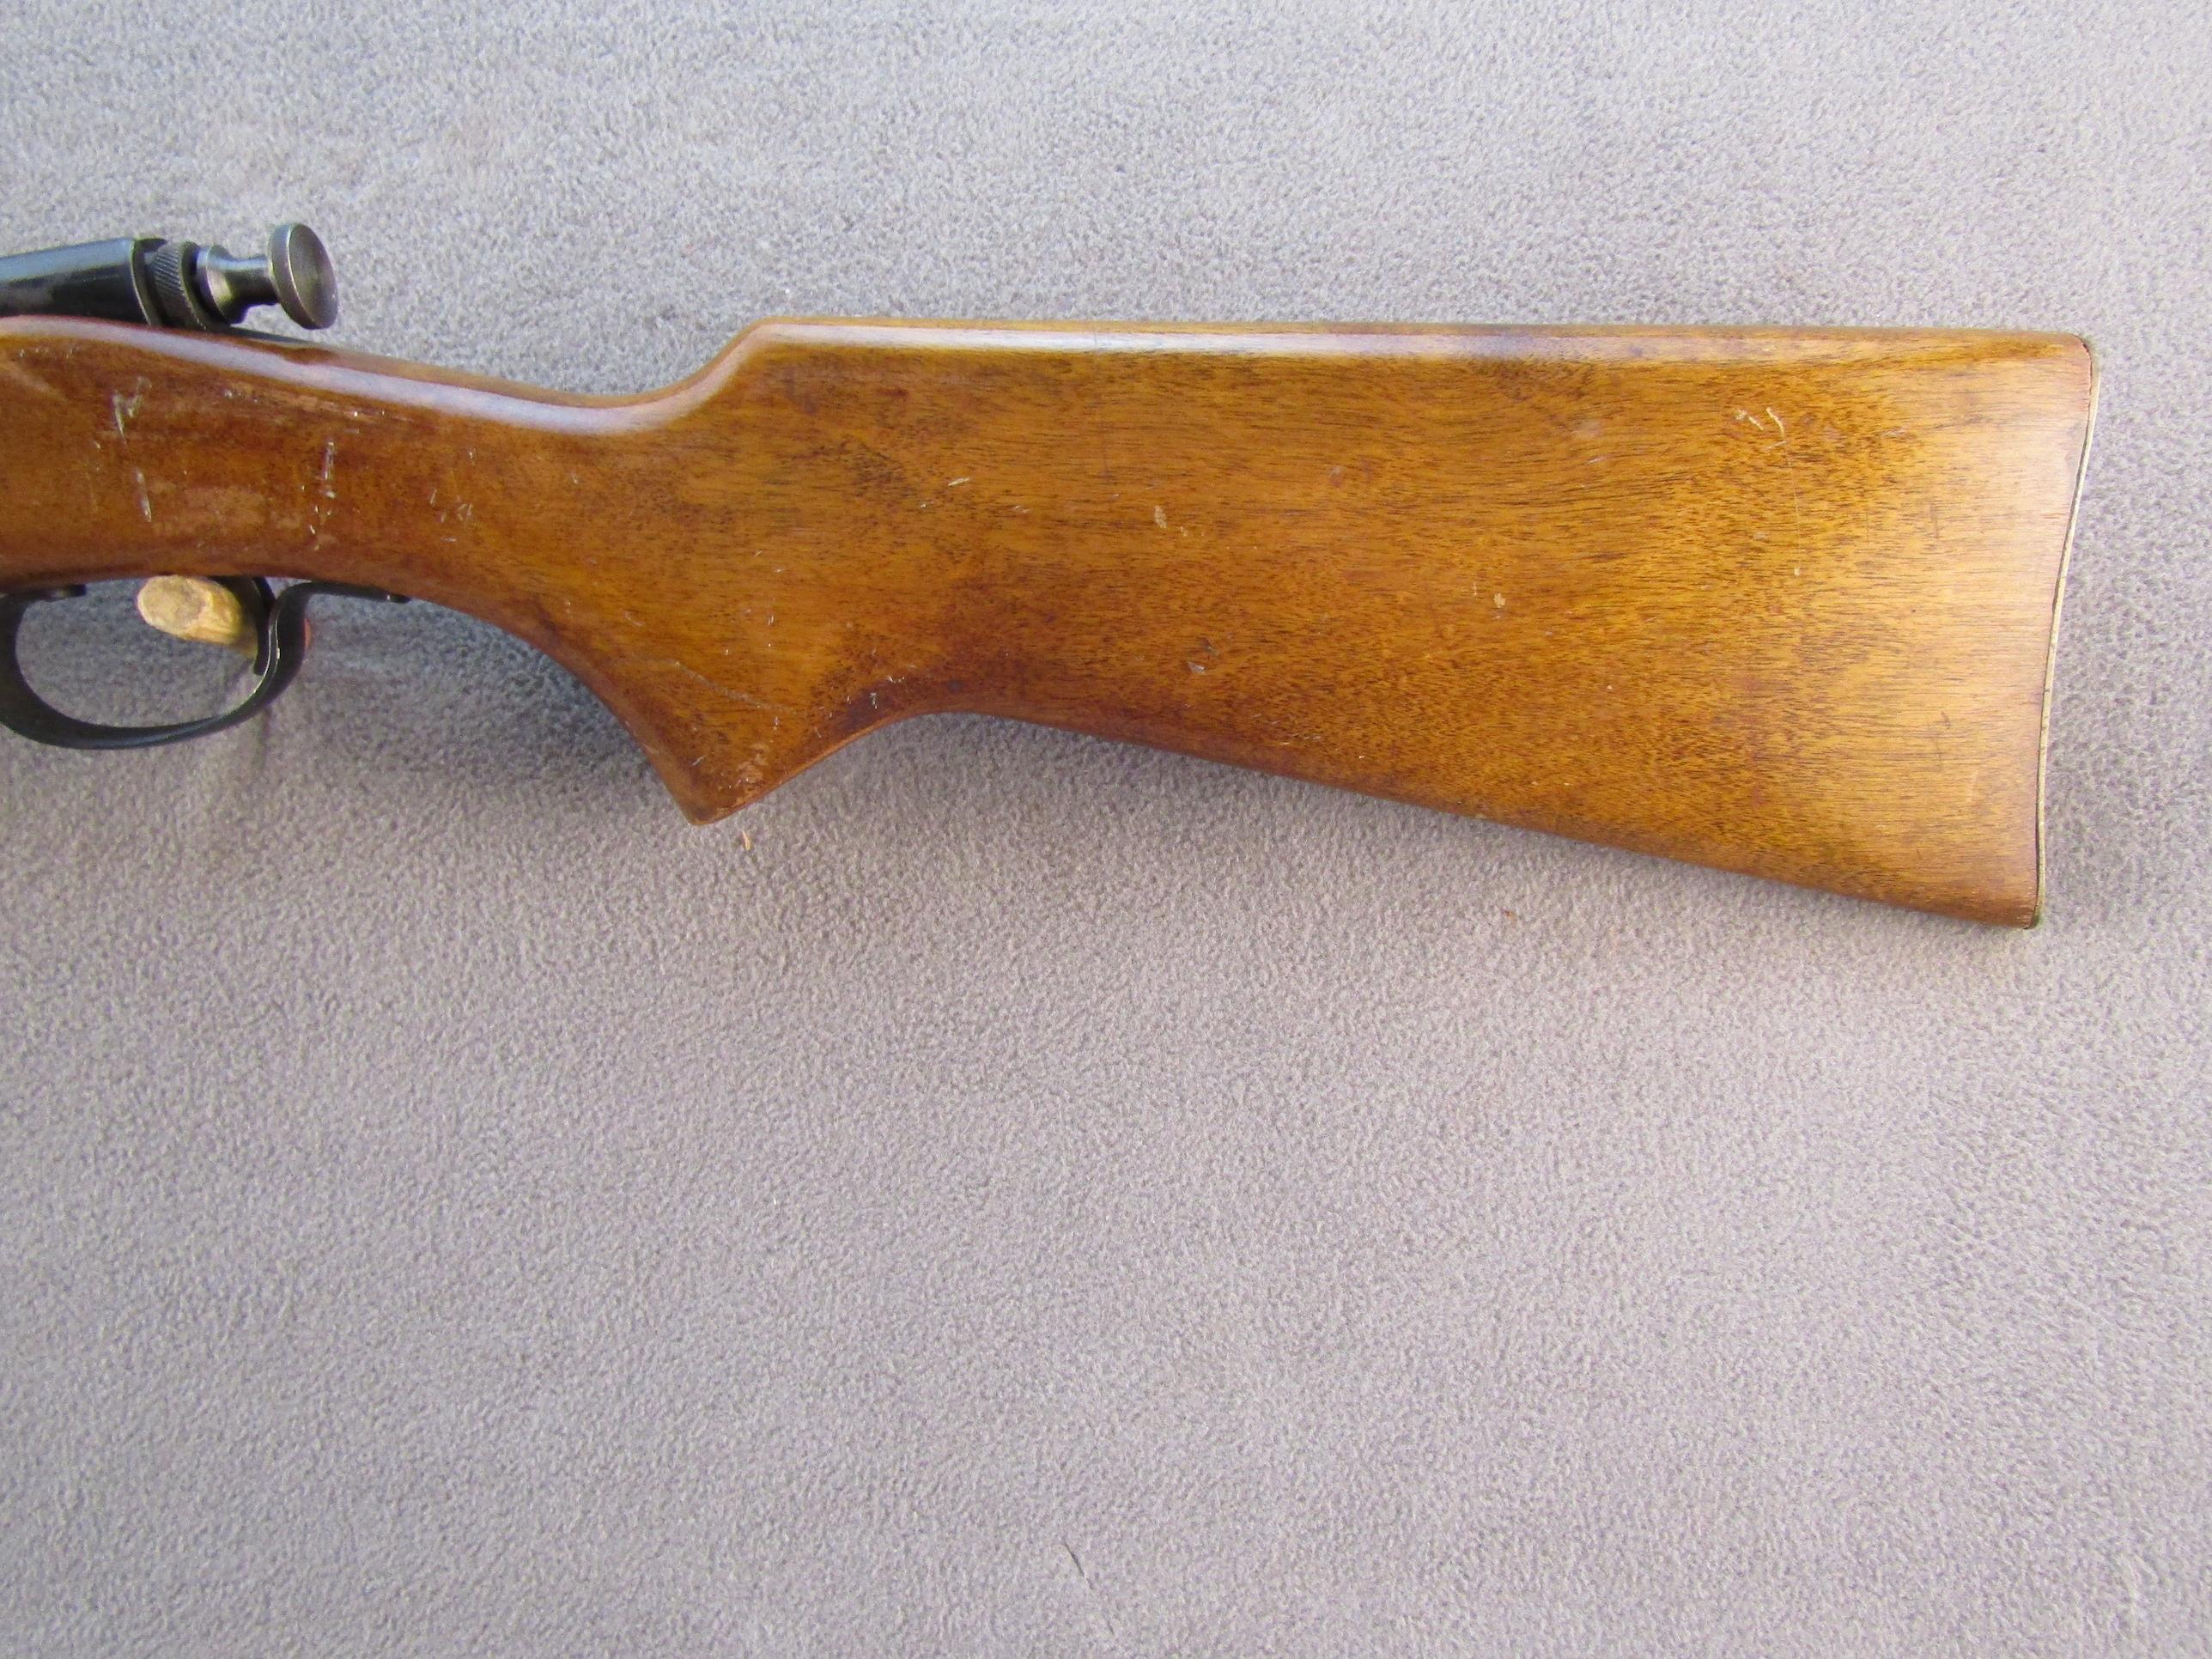 SPRINGFIELD Model Unknown, Bolt-Action Rifle, .22, S#NVSN